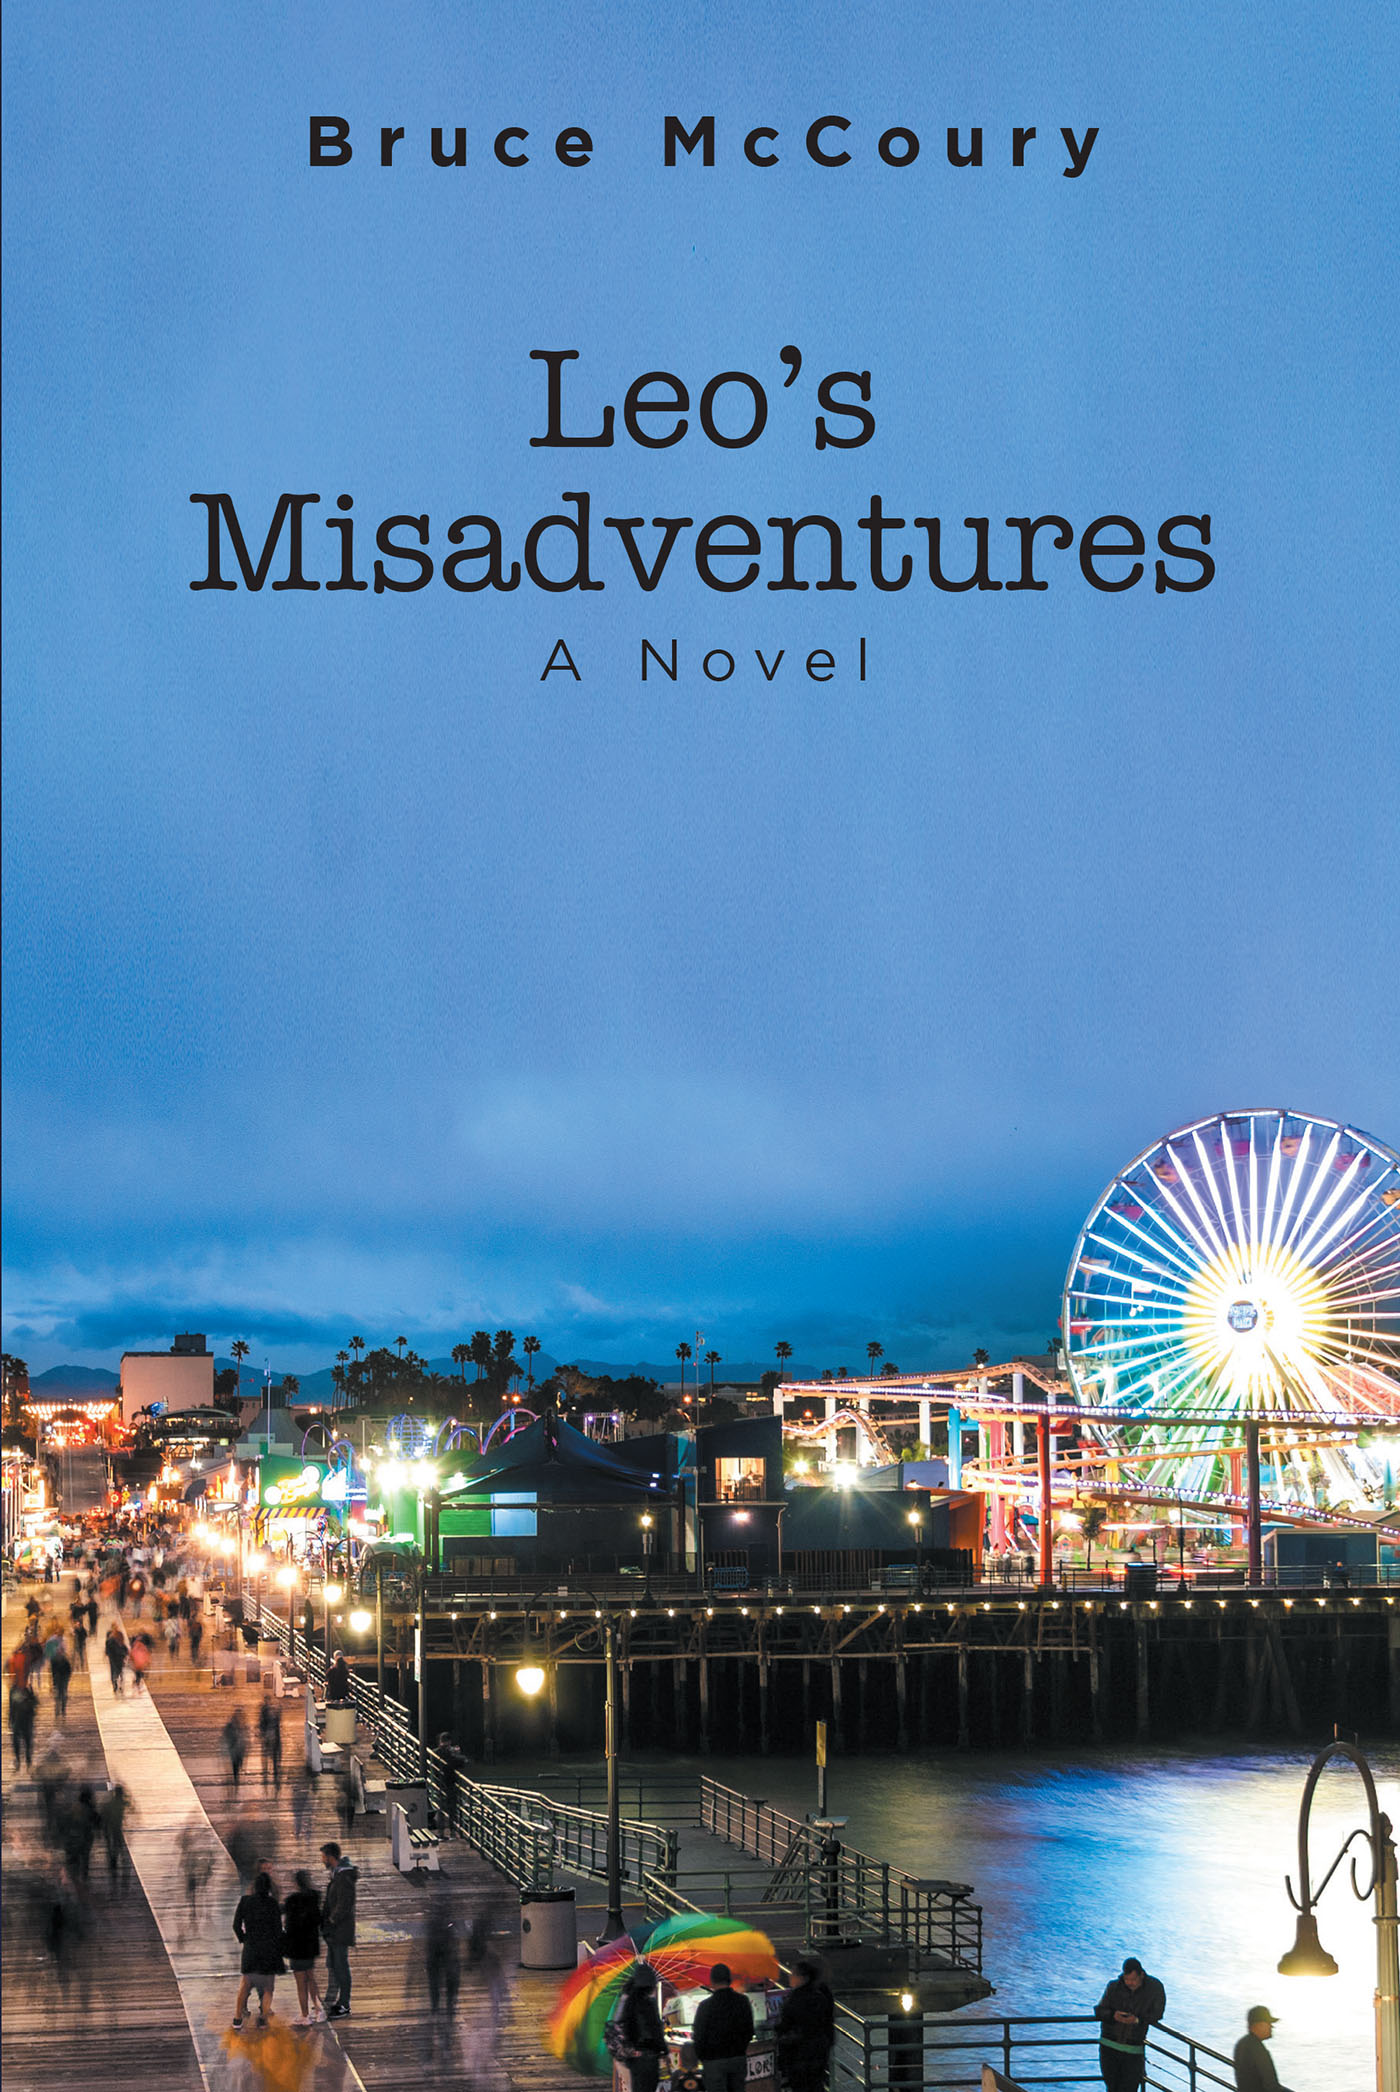 Bruce Mccoury’s New Book, "Leo's Misadventures: A Novel," Follows a Young Man Whose Life is Forever Changed After Winning the Lottery, Compelling Him to Give Back